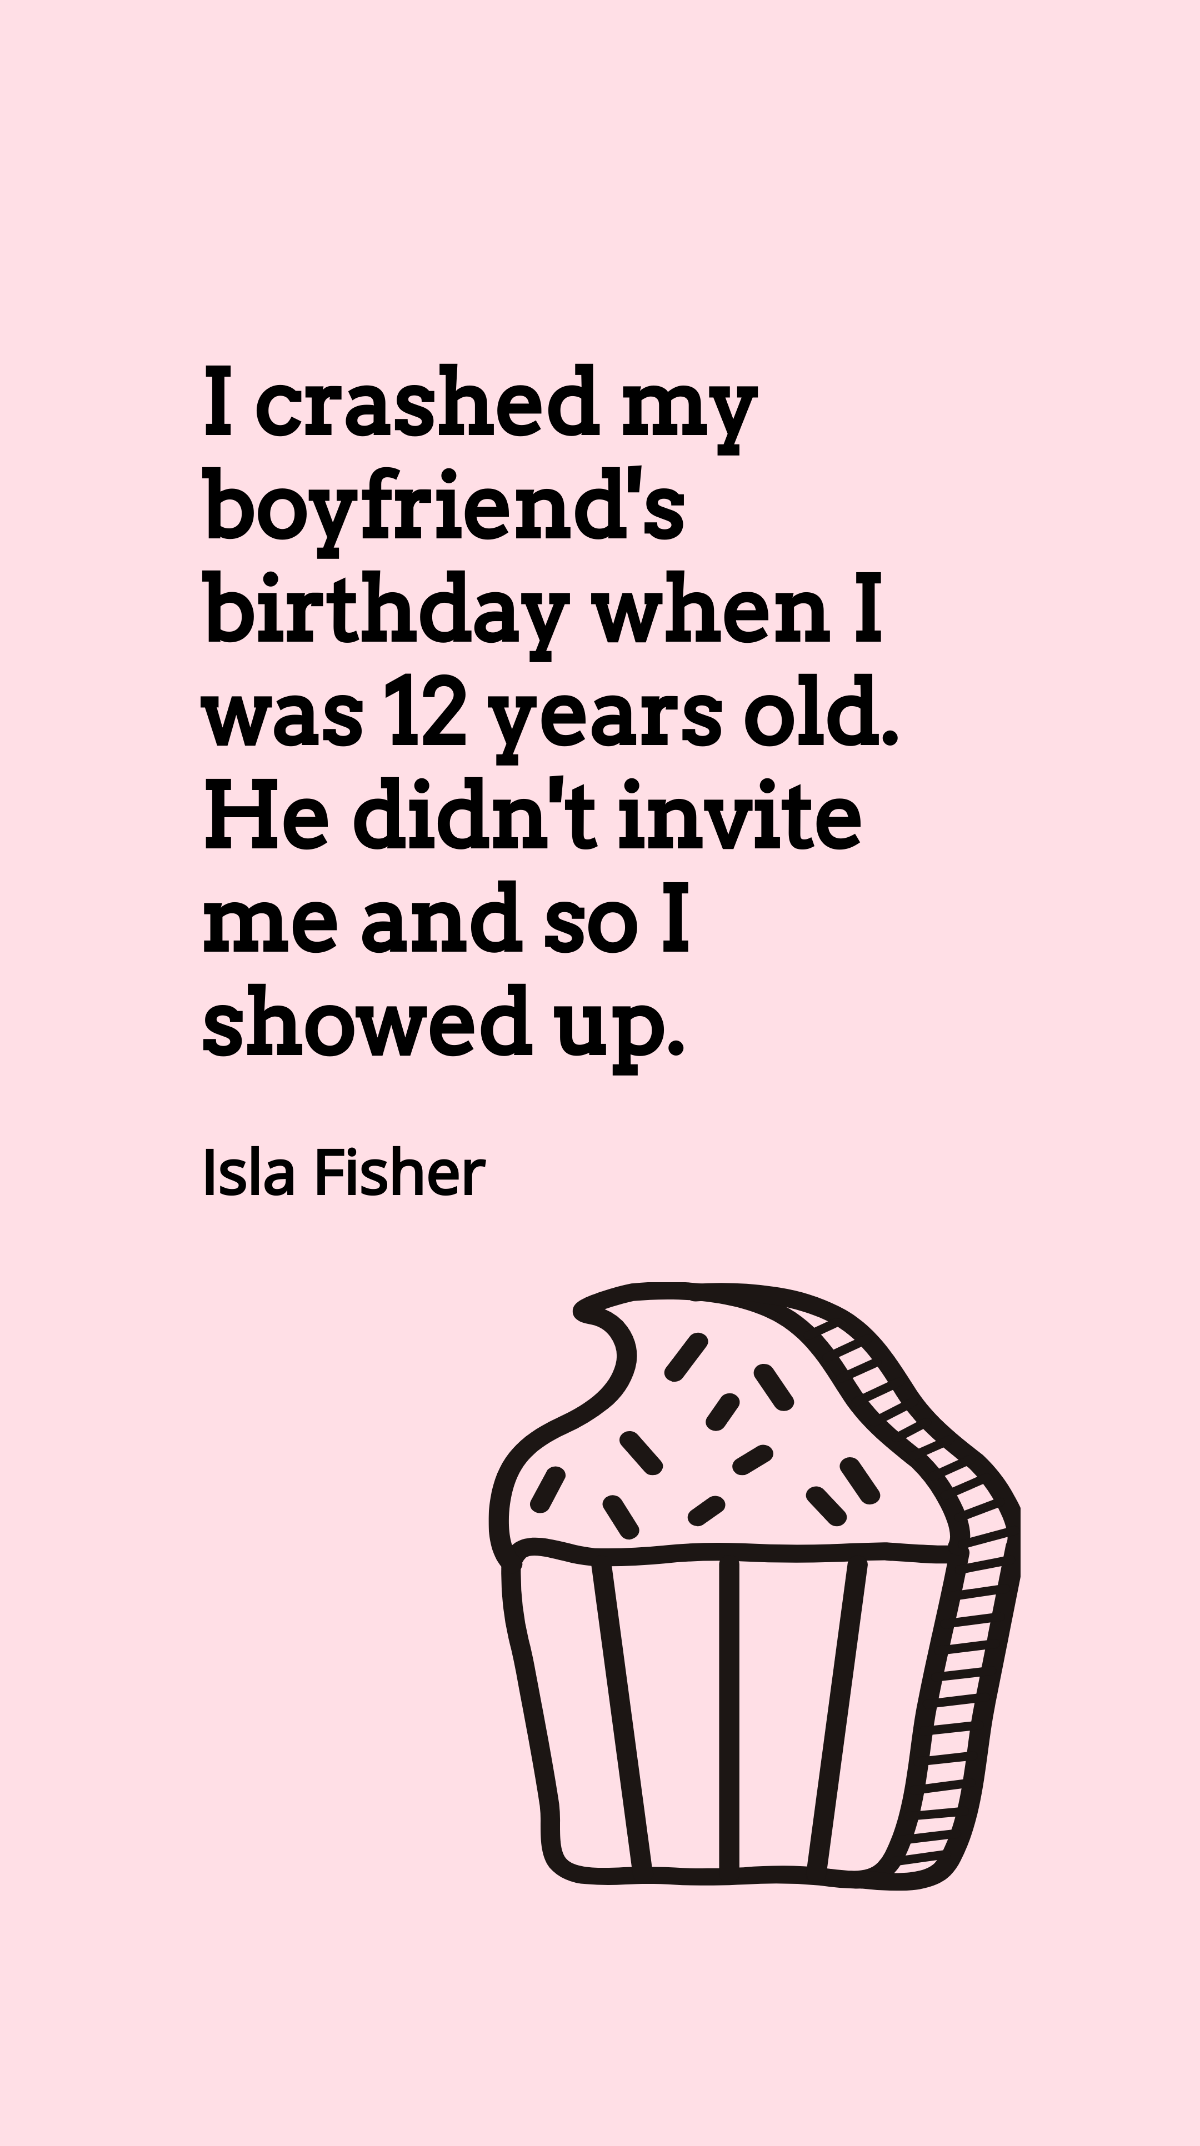 Isla Fisher - I crashed my boyfriend's birthday when I was 12 years old. He didn't invite me and so I showed up. Template